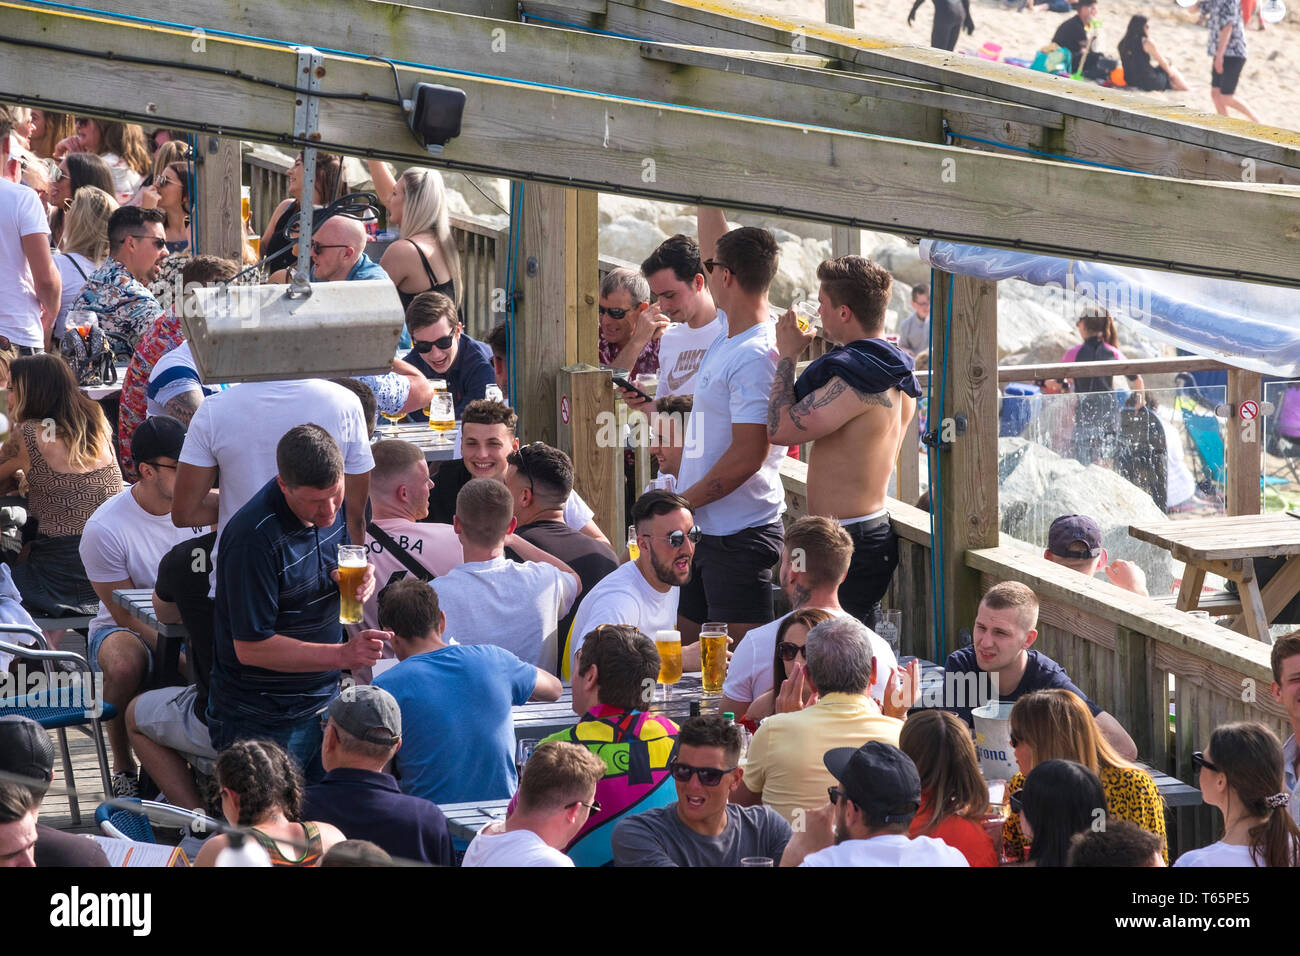 People drinking and socialising socializing on the outdoor deck area of the Fistral Beach Bar in Newquay in Cornwall. Stock Photo